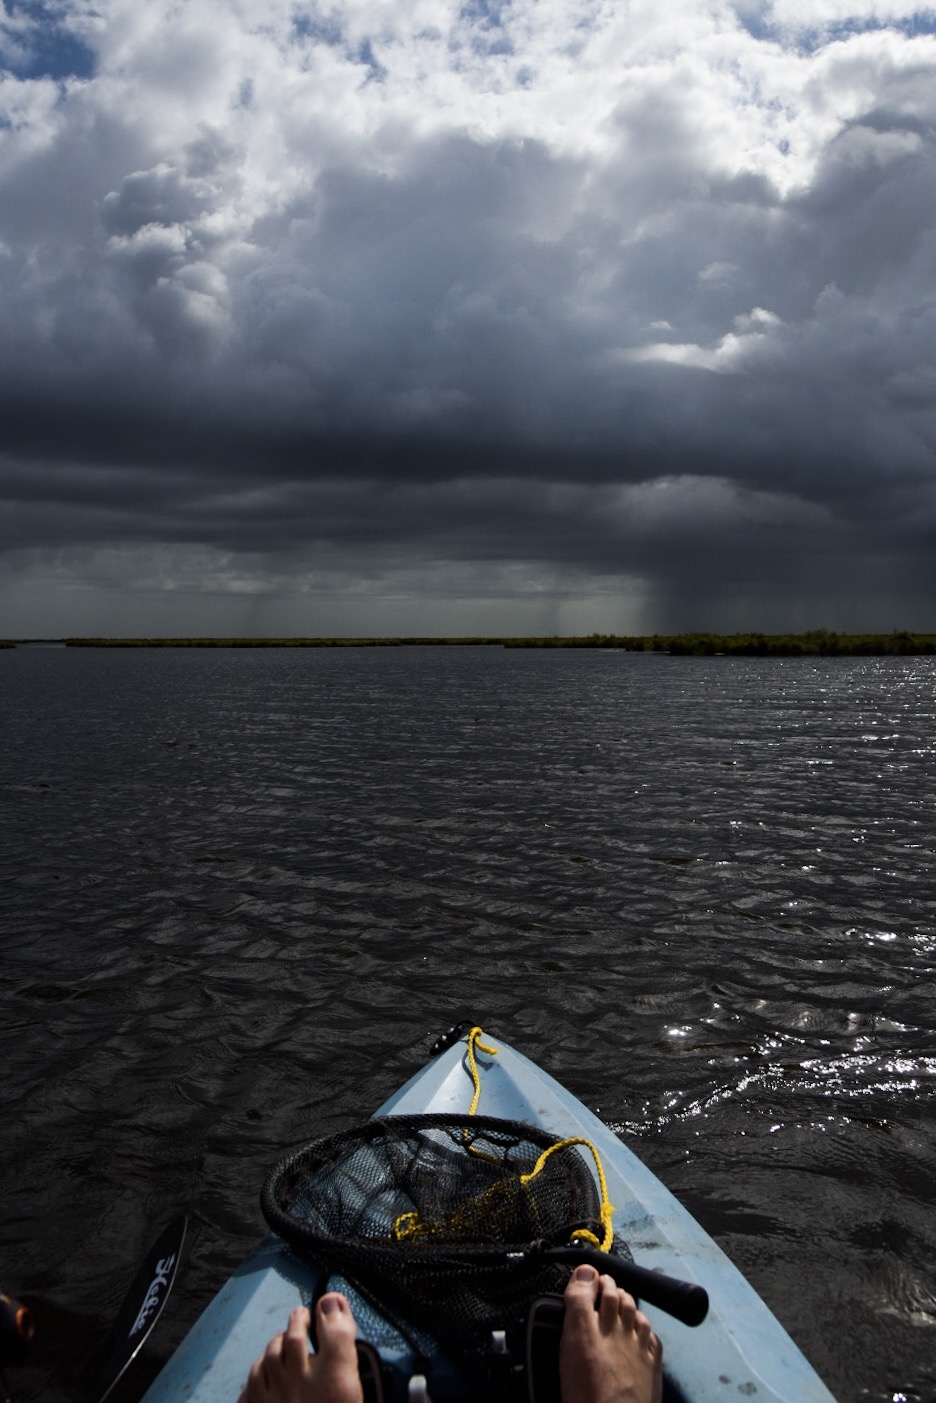 A distant storm as seen from a Hobie kayak